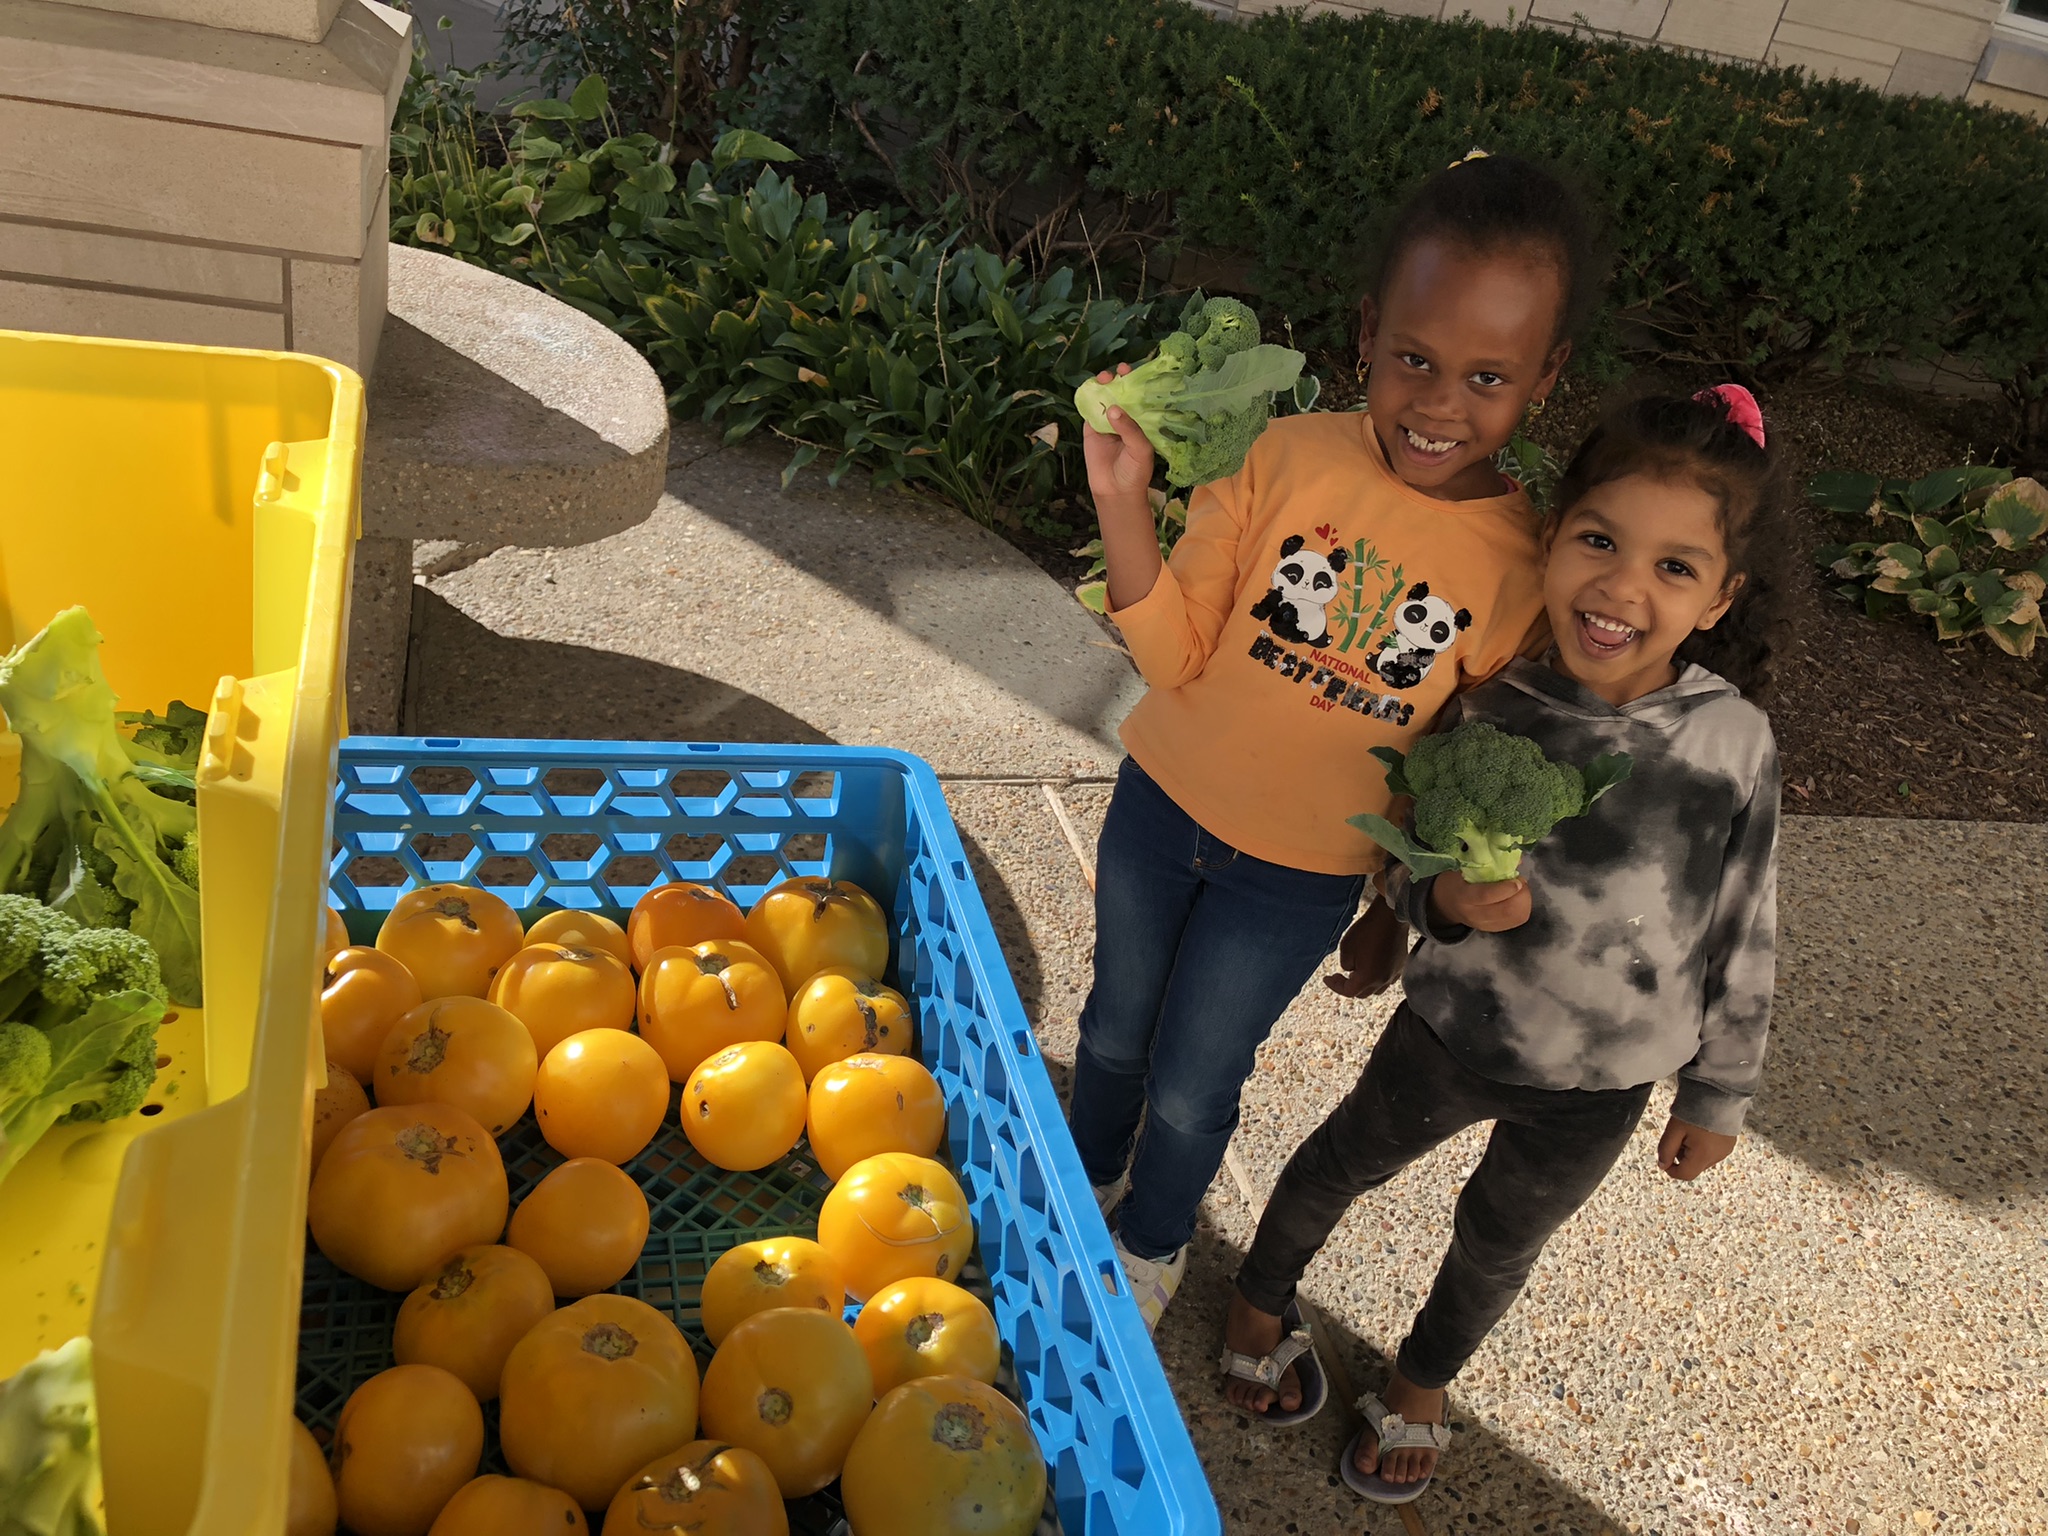 Two young girl smile wide as they hold broccoli at a free produce stand